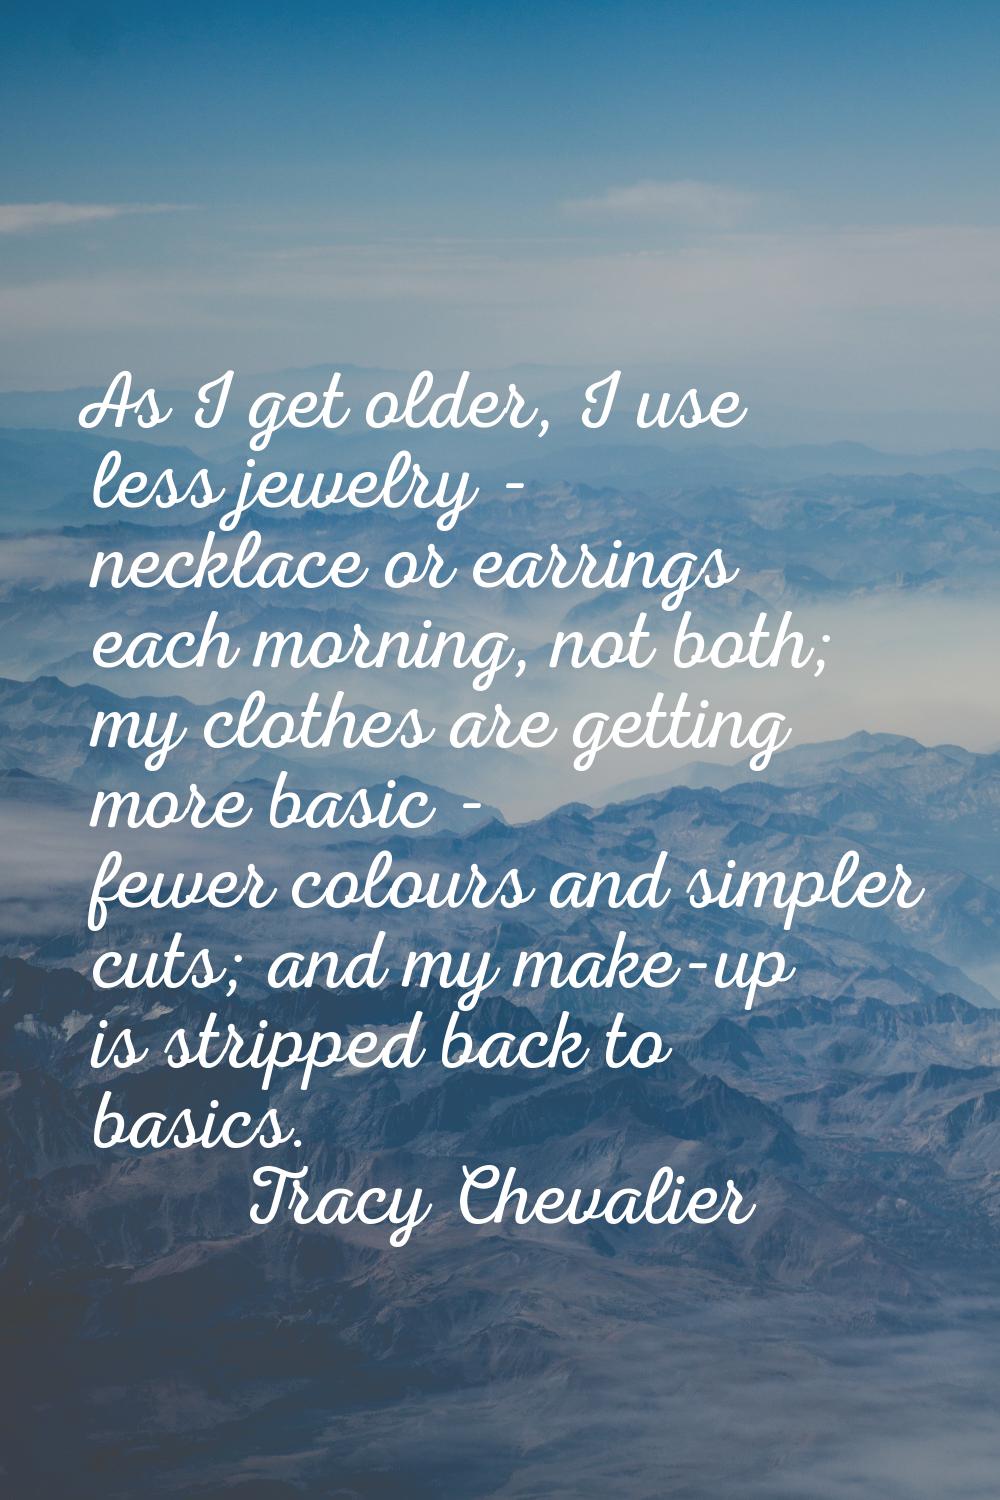 As I get older, I use less jewelry - necklace or earrings each morning, not both; my clothes are ge